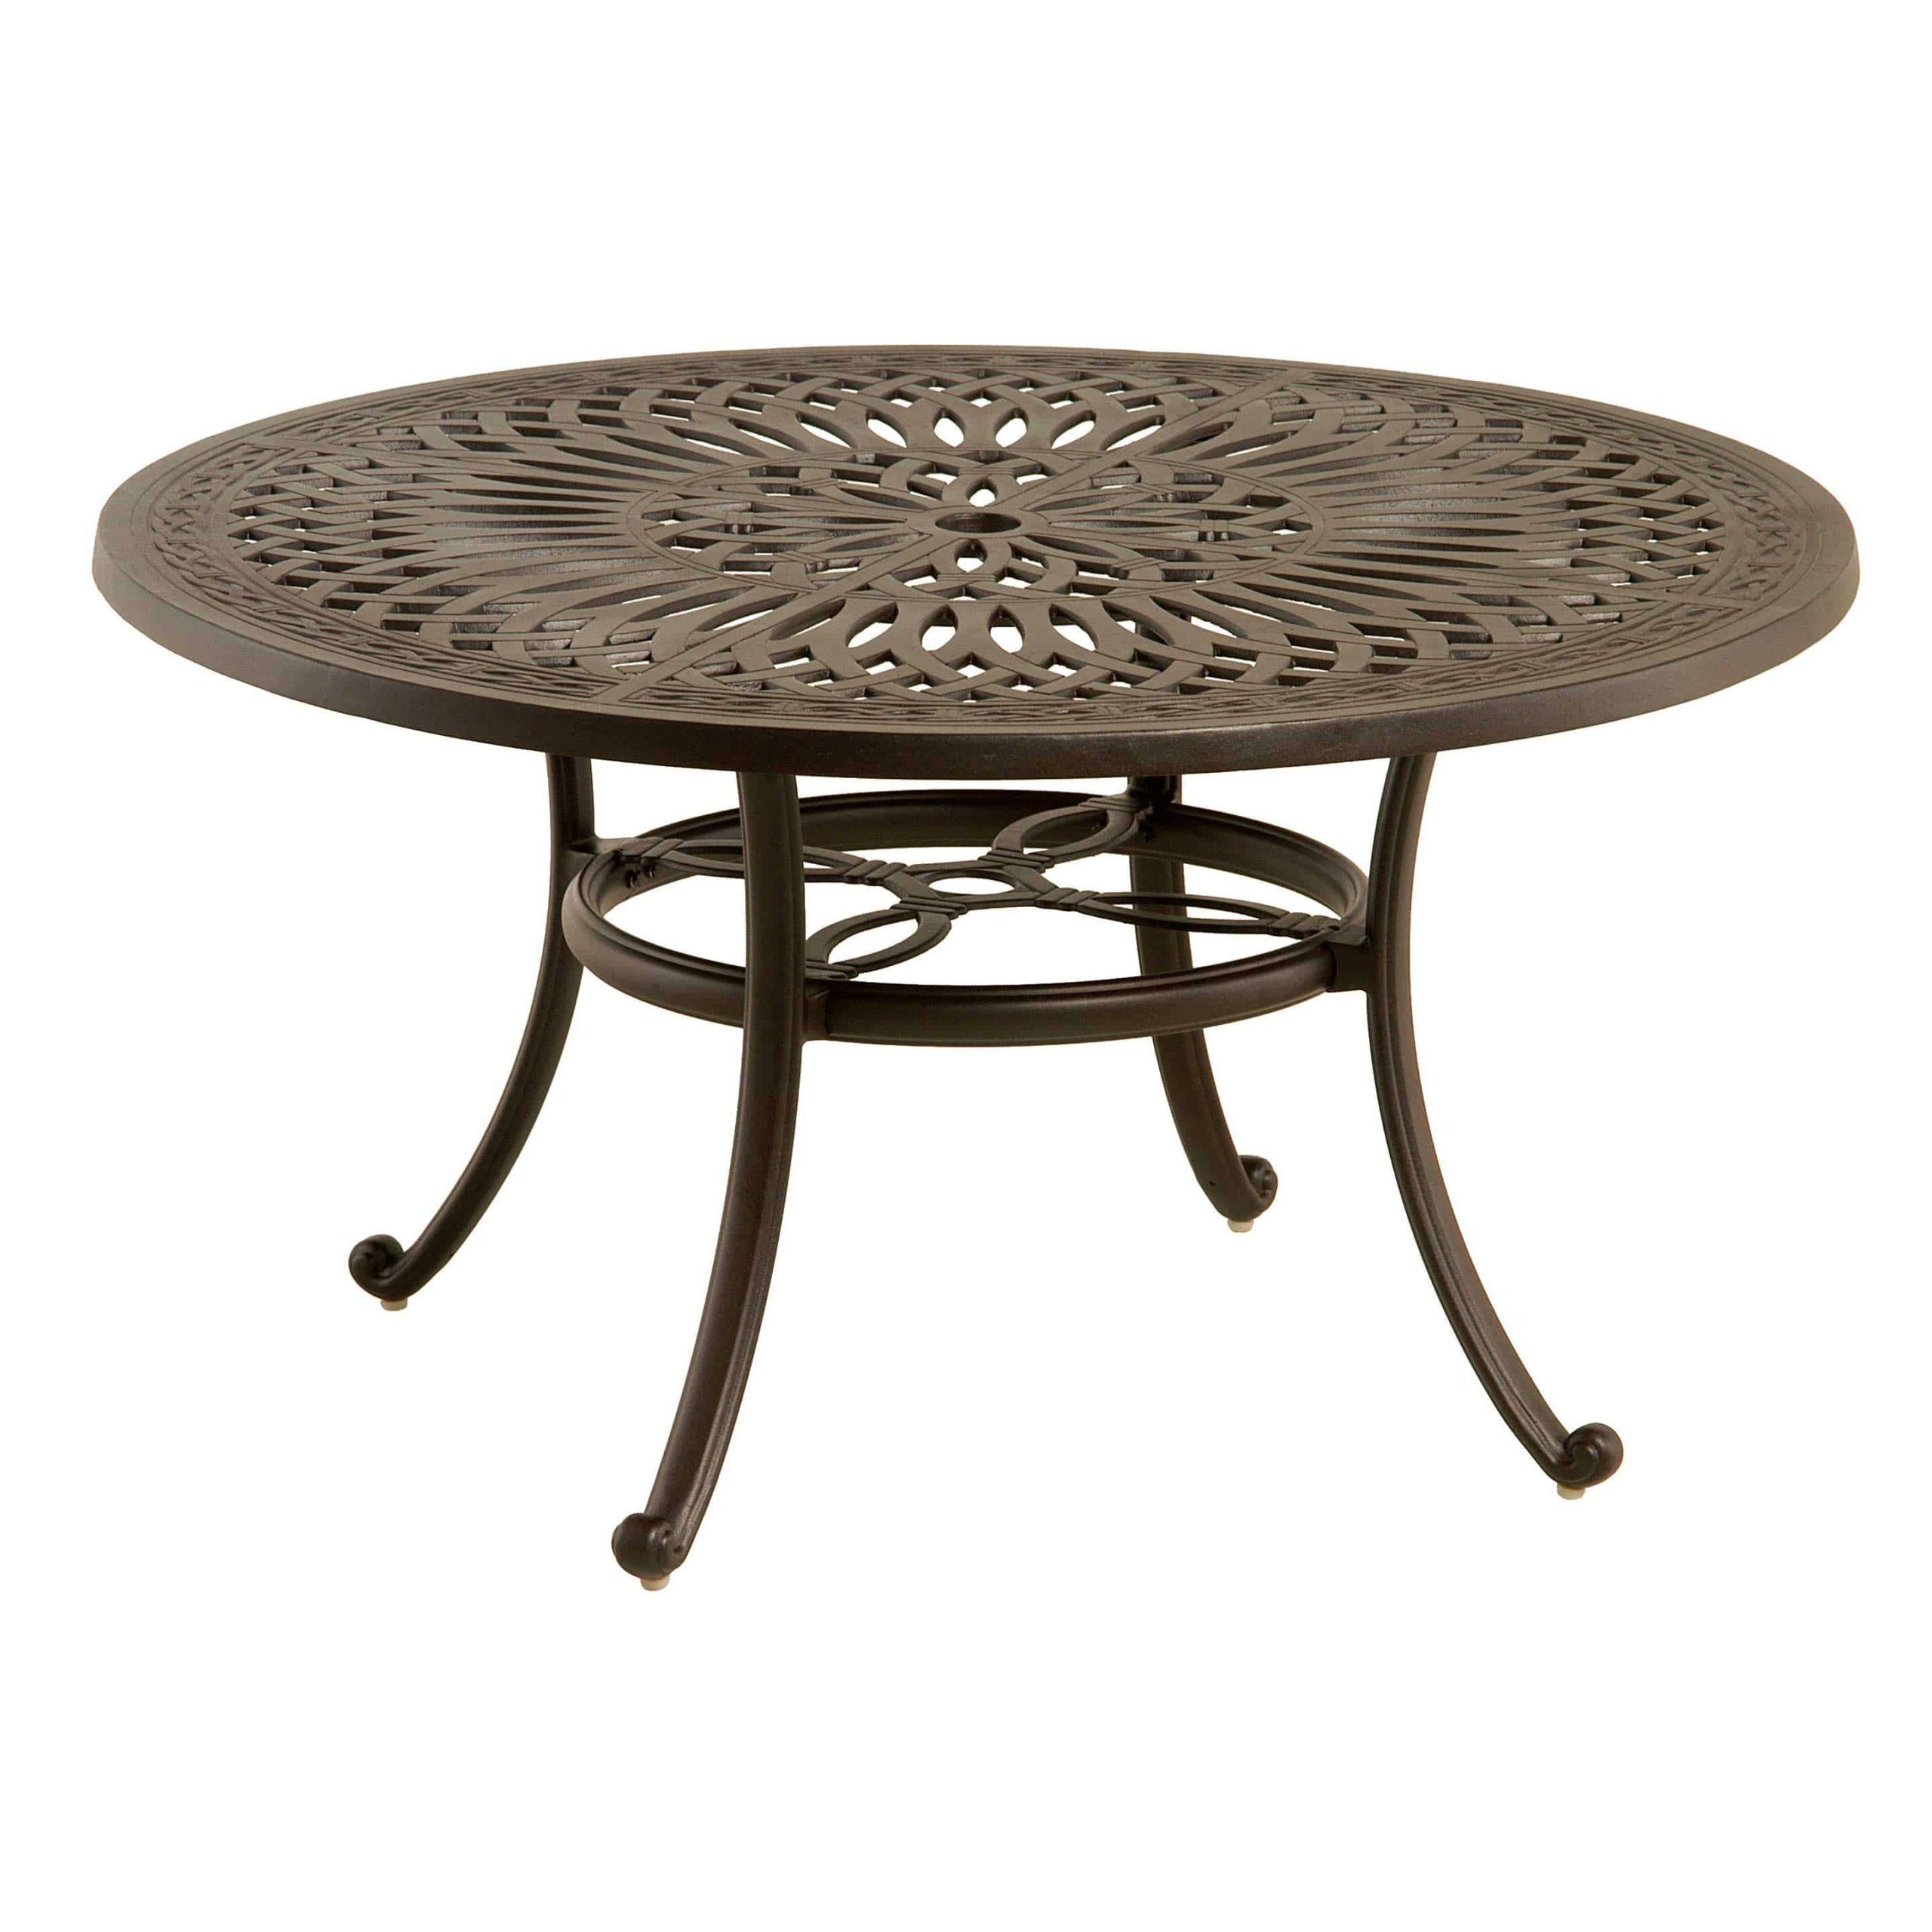 Incredible Gallery Of Round Patio Coffee Table Photos (View 2 of 15)